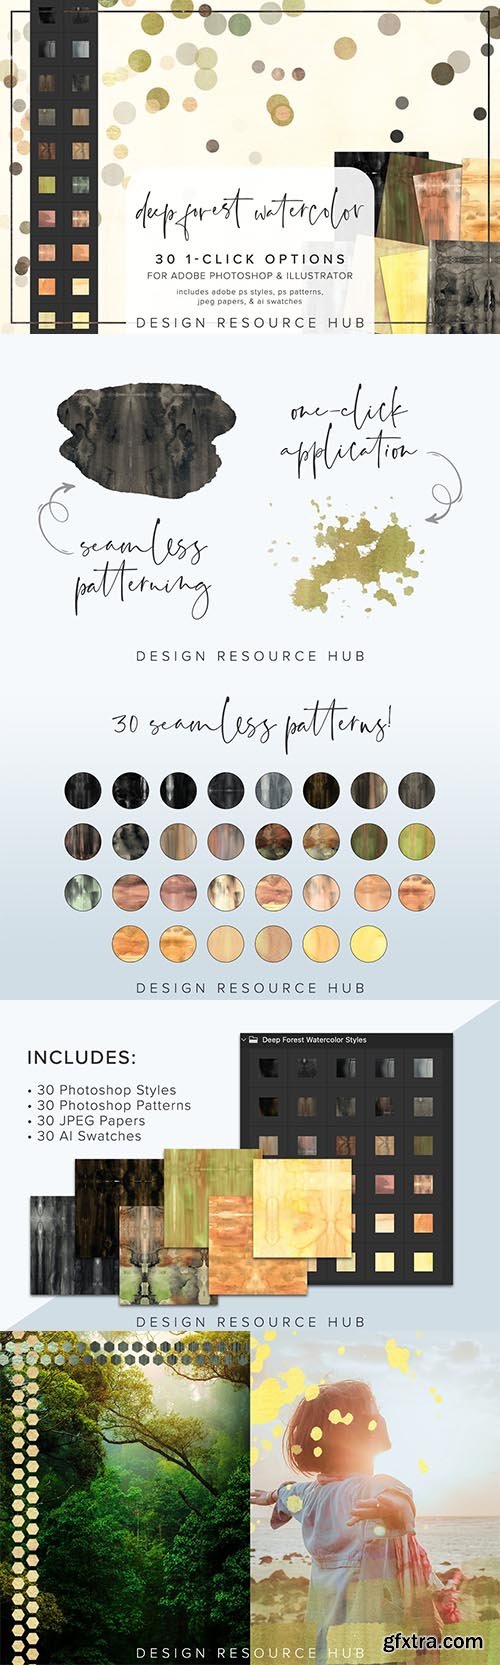 CreativeMarket - Deep Forest Watercolor PS Styles 6966025